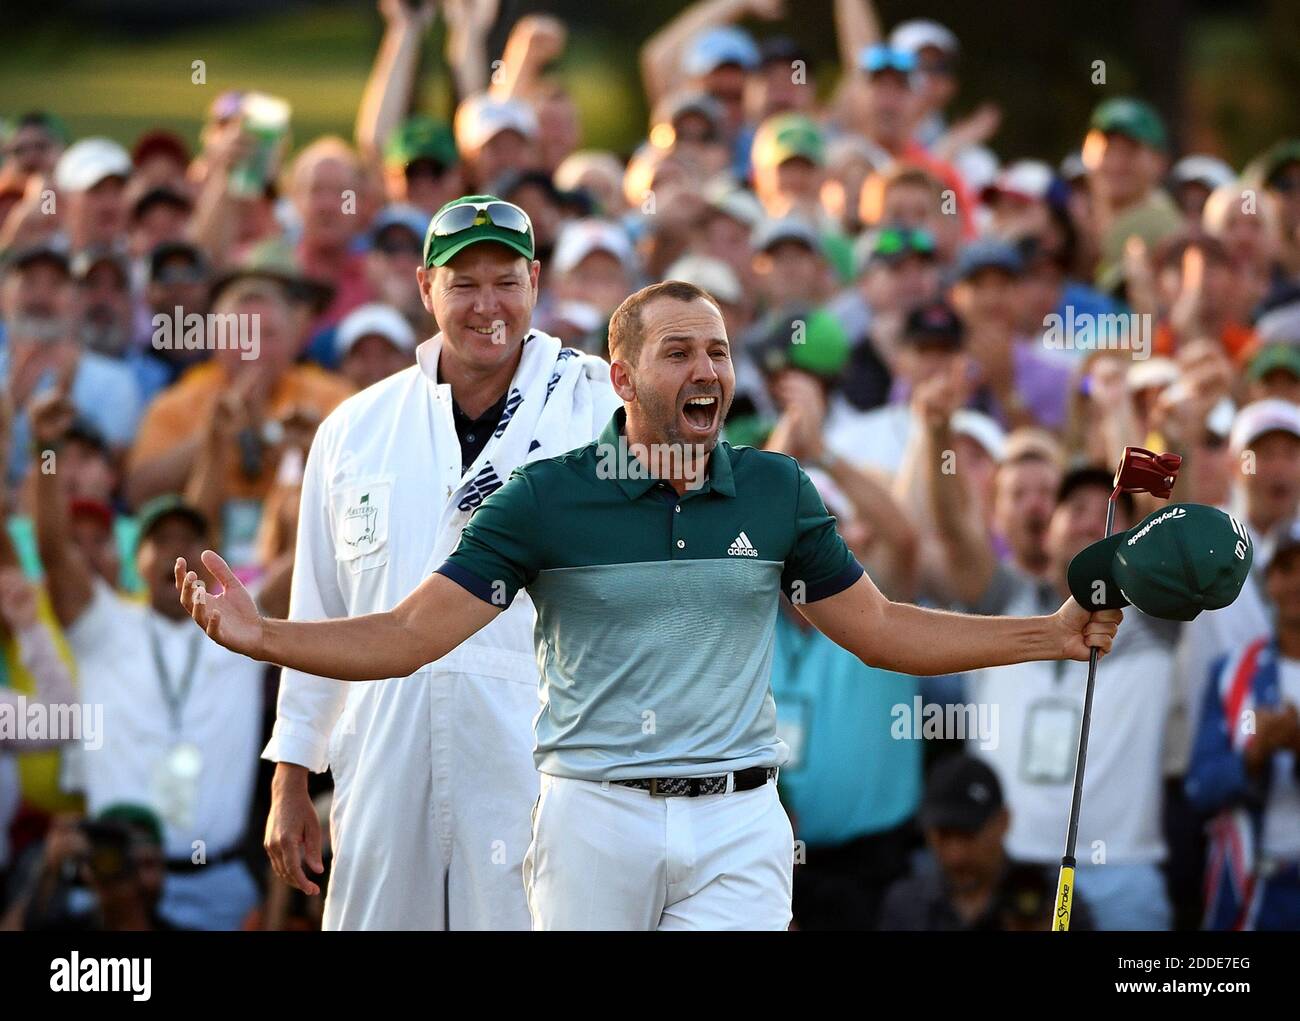 NO FILM, NO VIDEO, NO TV, NO DOCUMENTARY - Sergio Garcia celebrates winning the Masters Tournament on Sunday, April 9, 2017 at Augusta National Golf Club in Augusta, GA, USA. Garcia defeated Justin Rose in a playoff. Looking on is Garcia's caddie, Glen Murray. Photo by Jeff Siner/Charlotte Observer/TNS/ABACAPRESS.COM Stock Photo